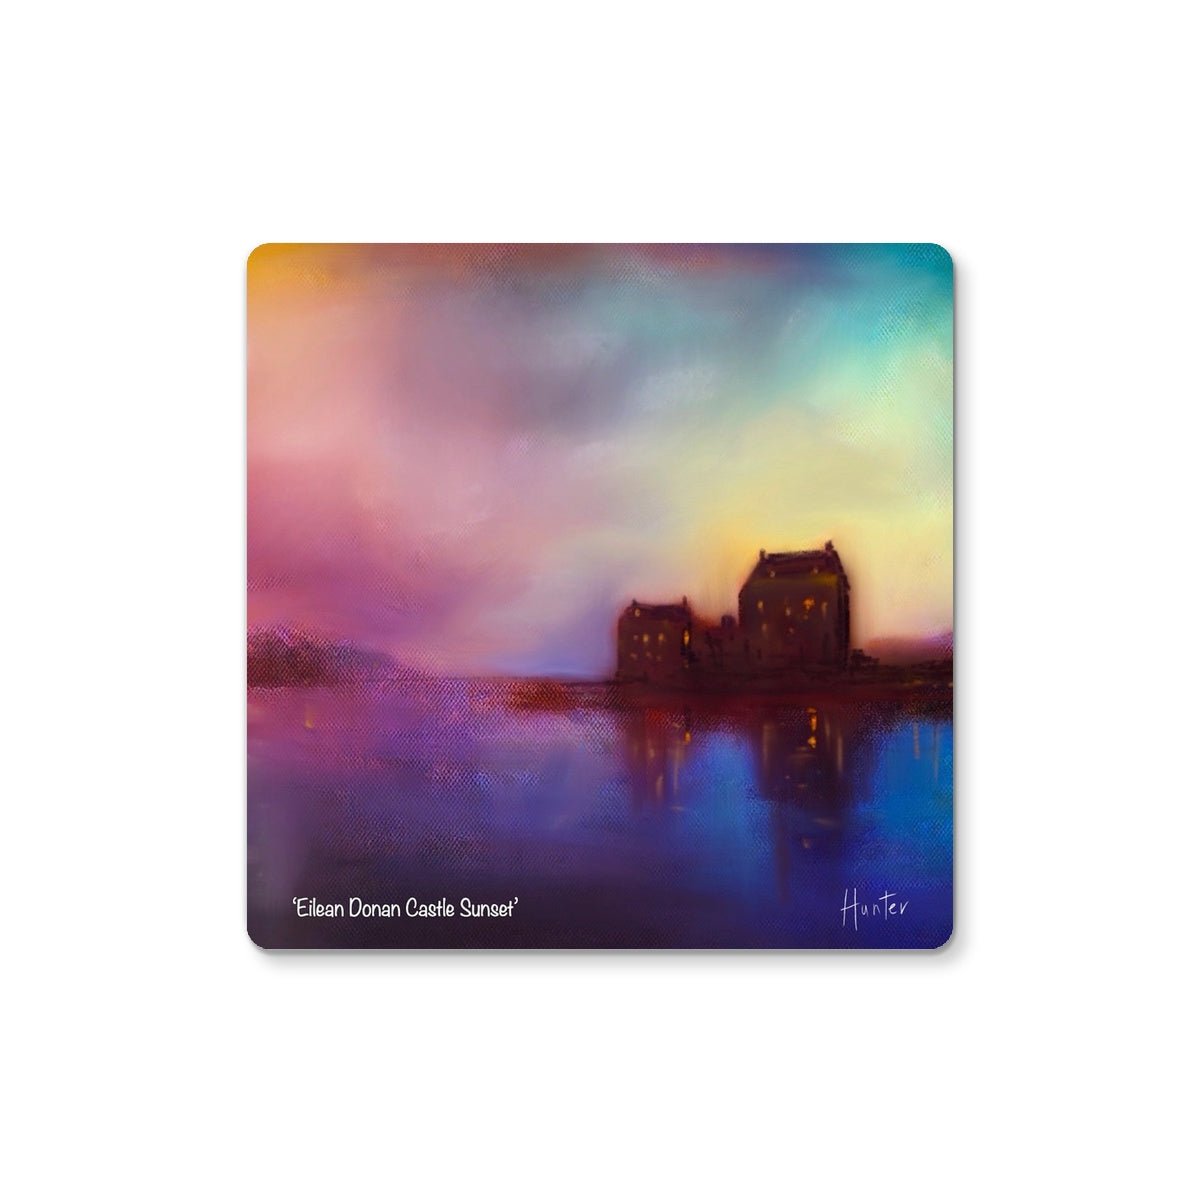 Eilean Donan Castle Sunset Art Gifts Coaster-Coasters-Historic & Iconic Scotland Art Gallery-Single Coaster-Paintings, Prints, Homeware, Art Gifts From Scotland By Scottish Artist Kevin Hunter